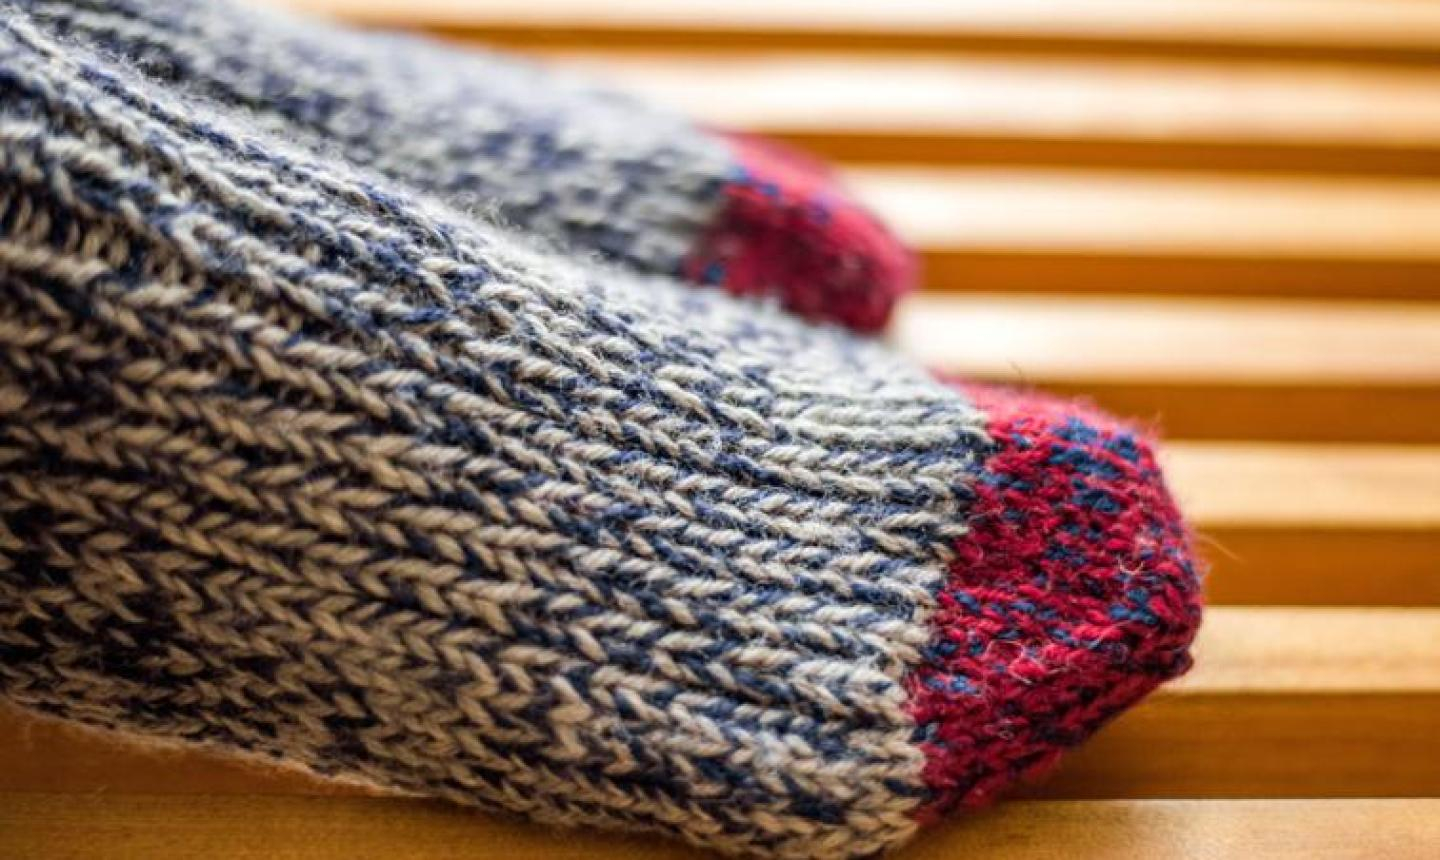 Knitting Sock Patterns 7 Pro Tips For Sock Knitting Success Even If Its Your First Time